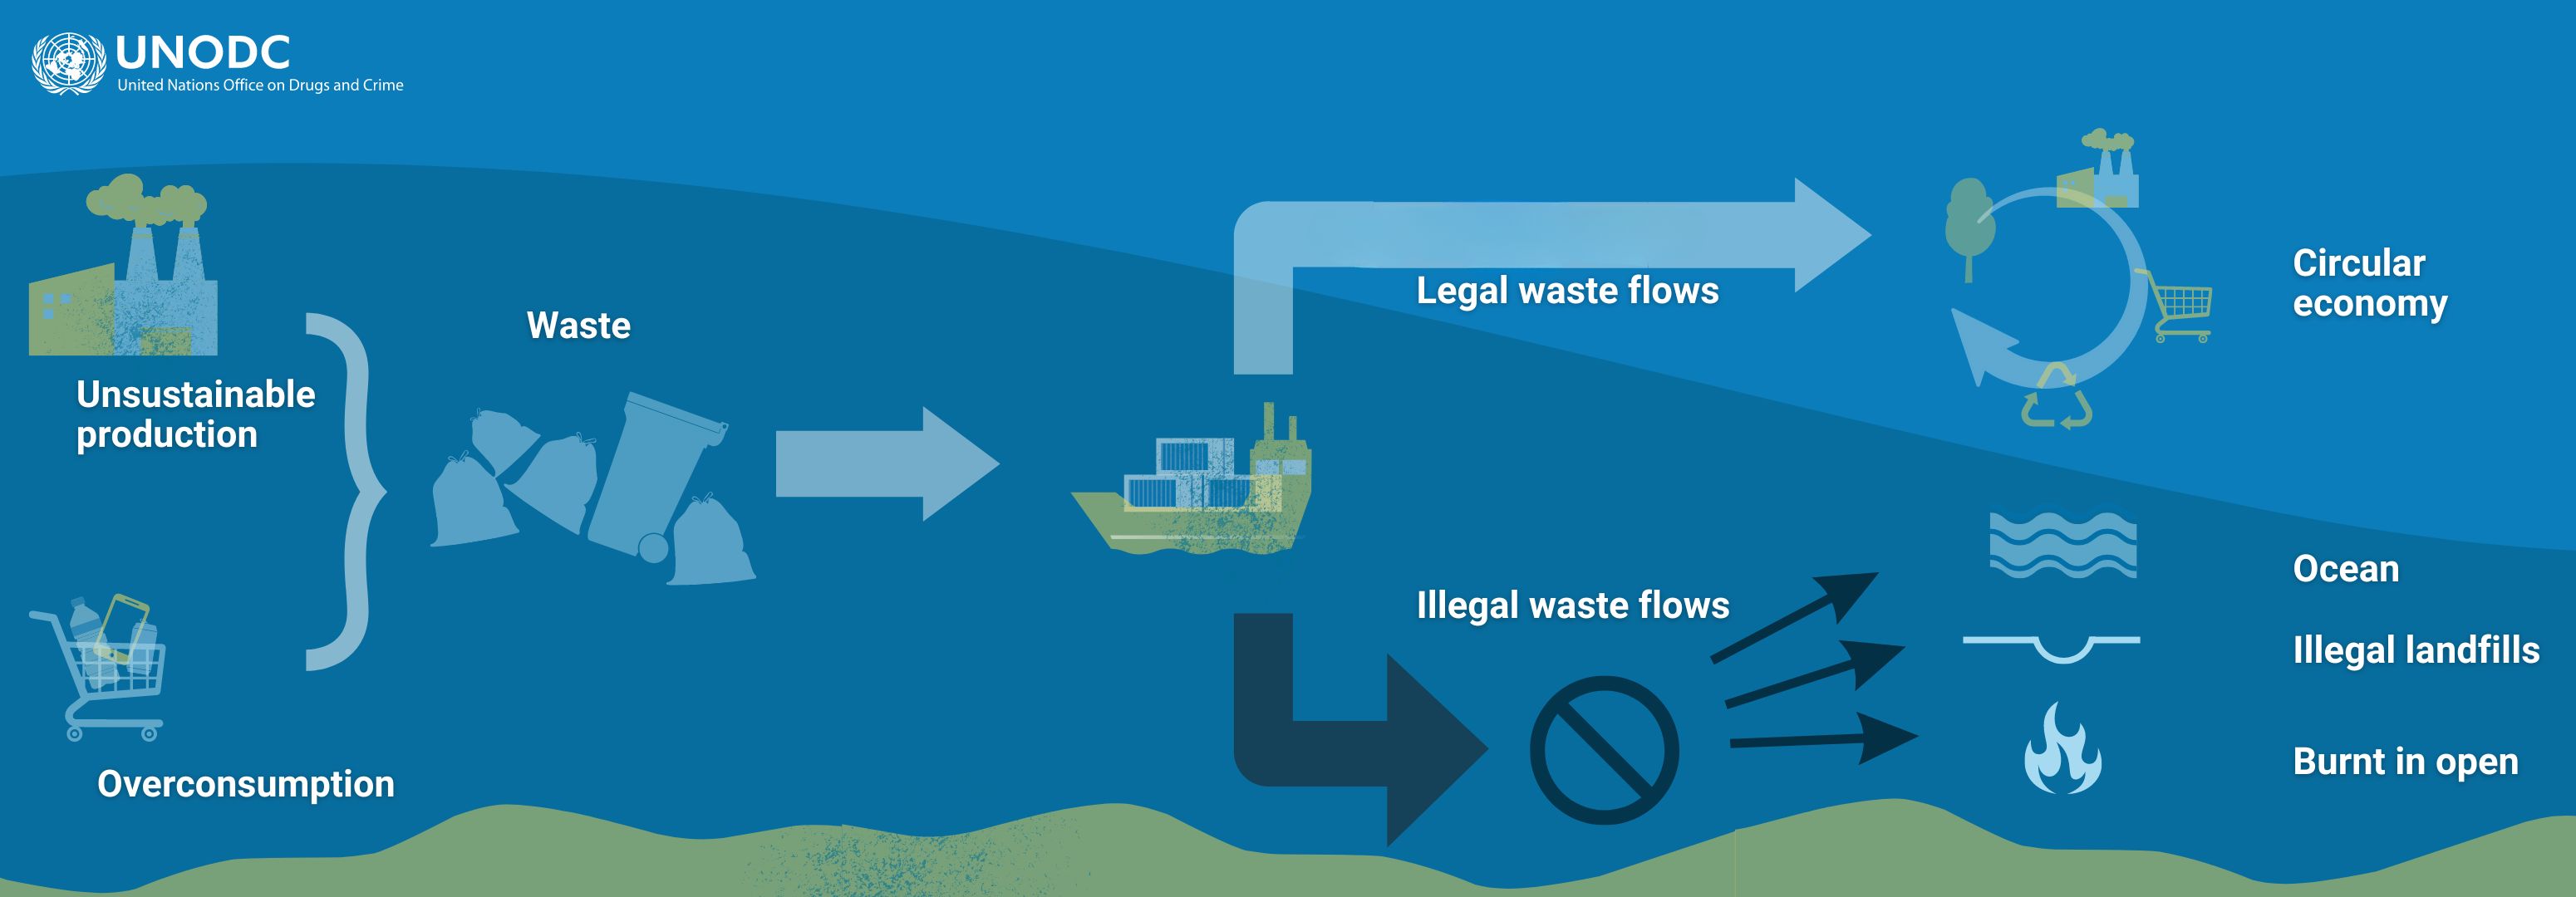 Waste trafficking leads to most waste ending up in illegal landfills, the ocean, or burnt in the open, thwarting any ambitions towards a circular economy